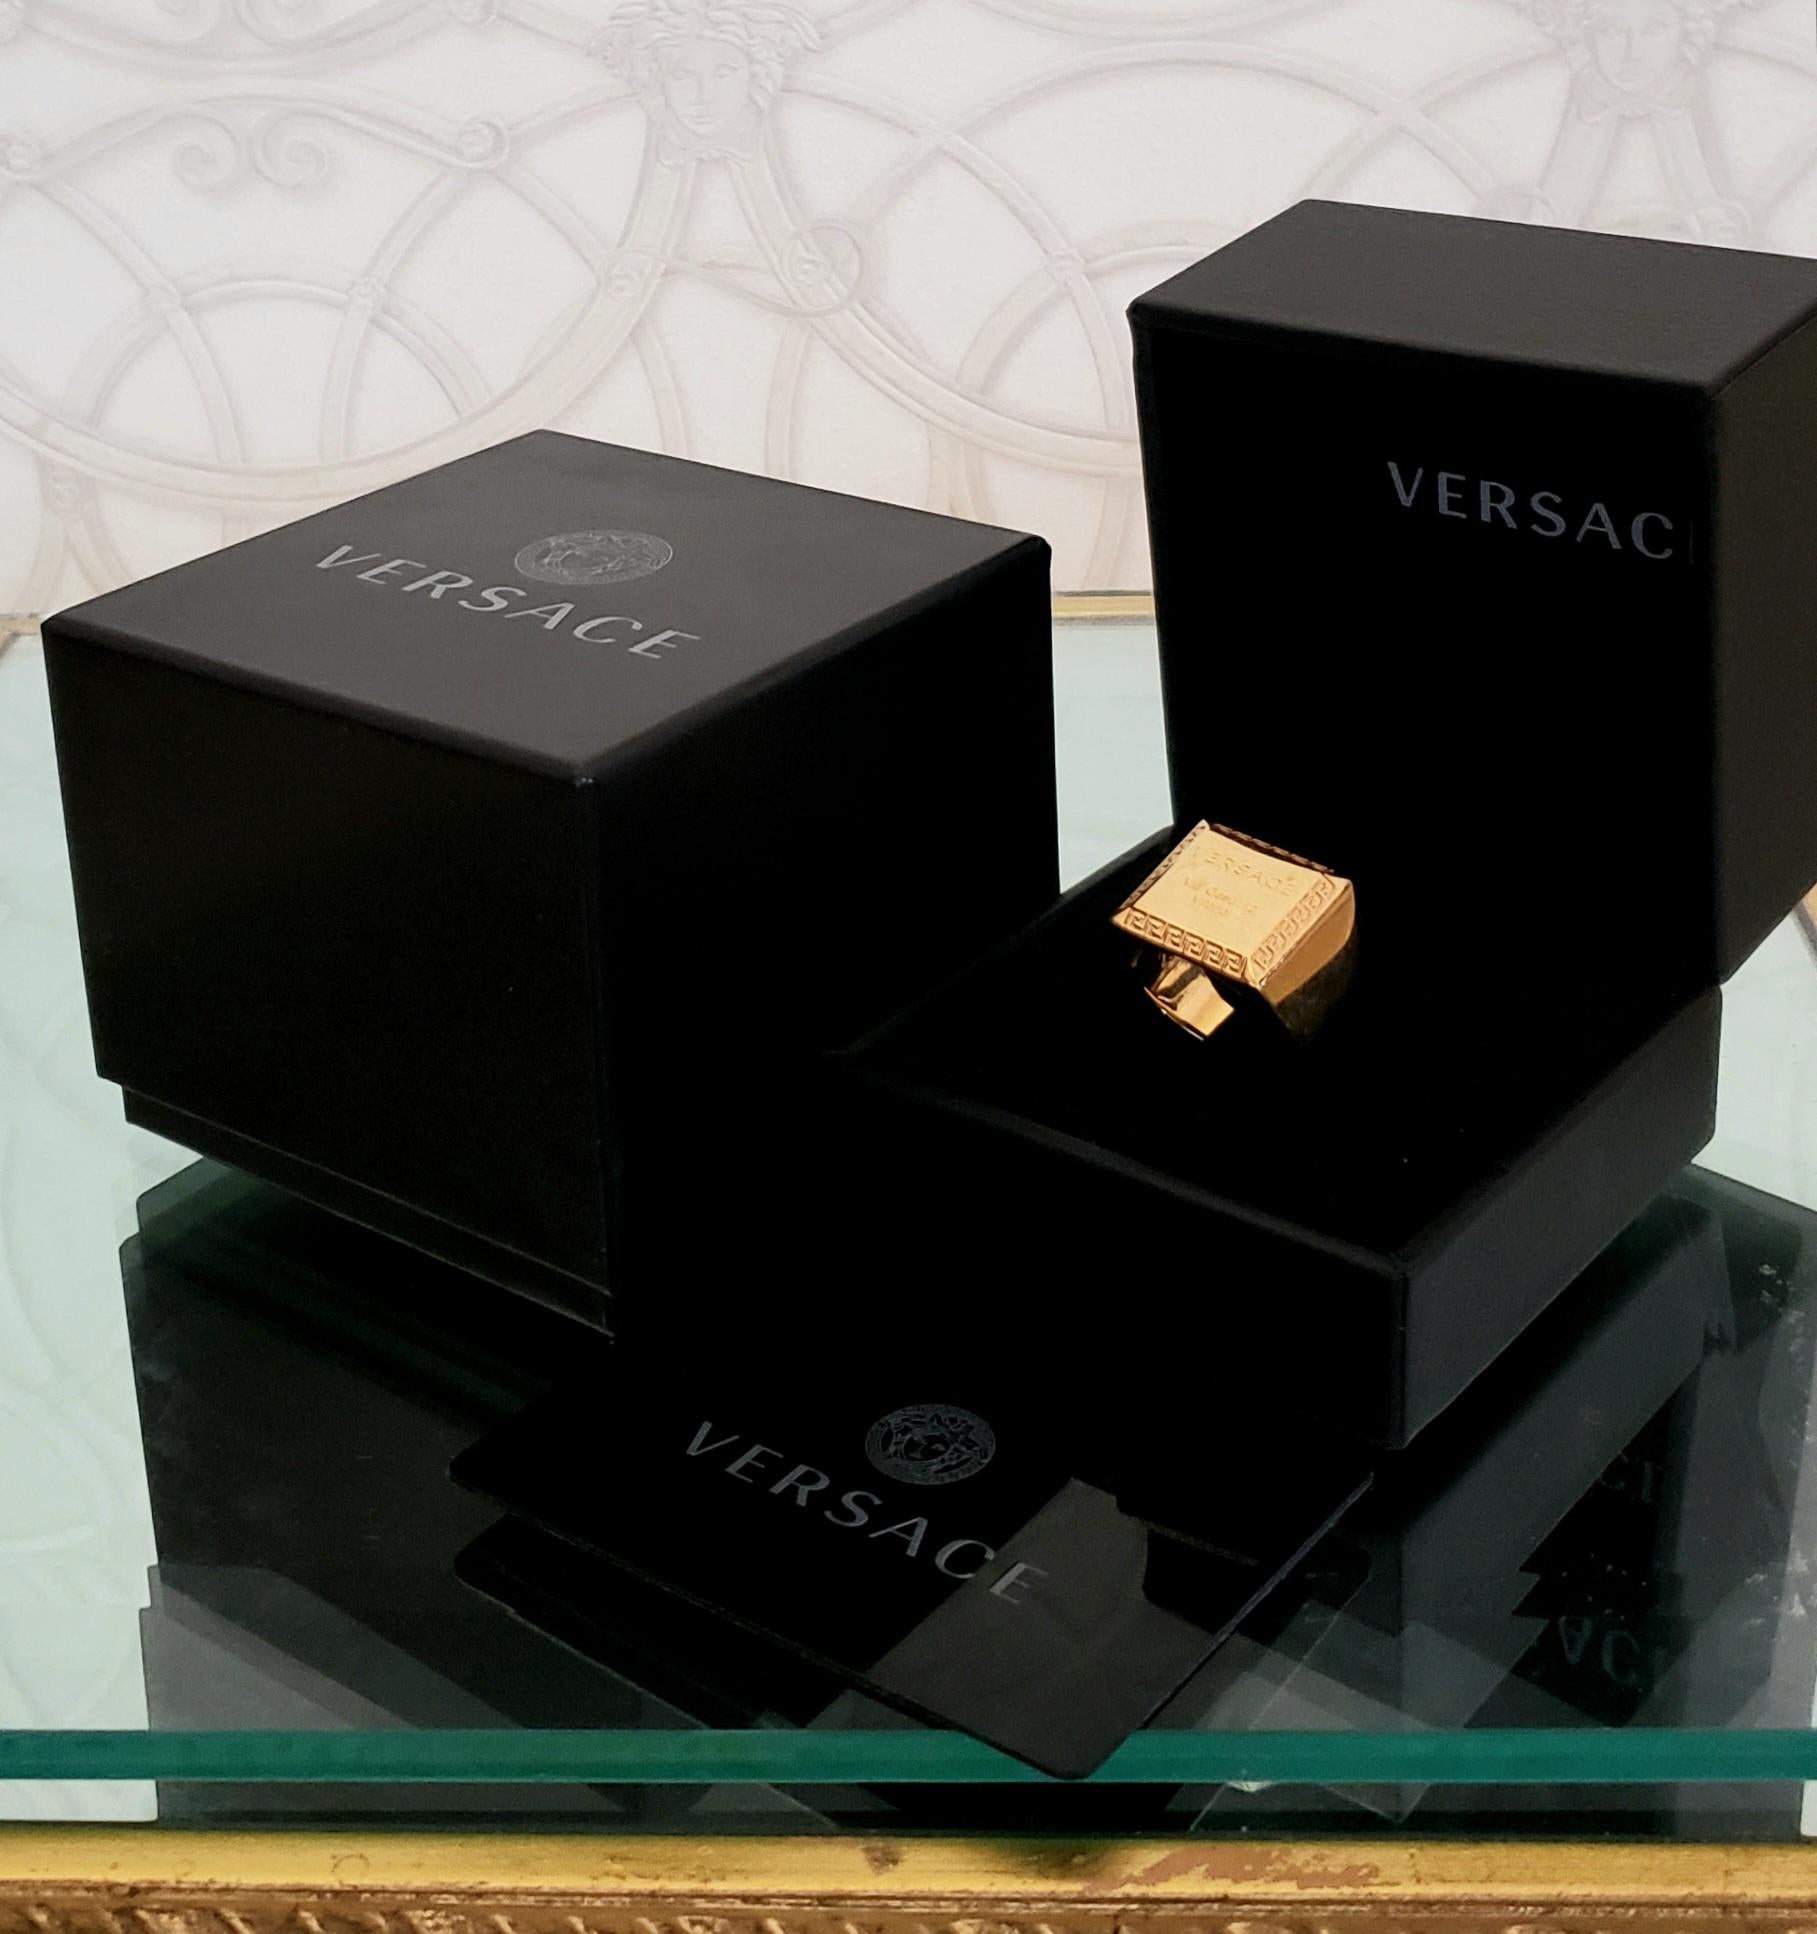 VERSACE


Dedicated
 to 20th anniversary of Gianni Versace Tragic Death
2018 Spring/summer Tribute collection

Gold plated square ring with Greek key

The purposely aged for a Vintage look


Made in Italy

US Size 10.5

Brand new. Display model, got